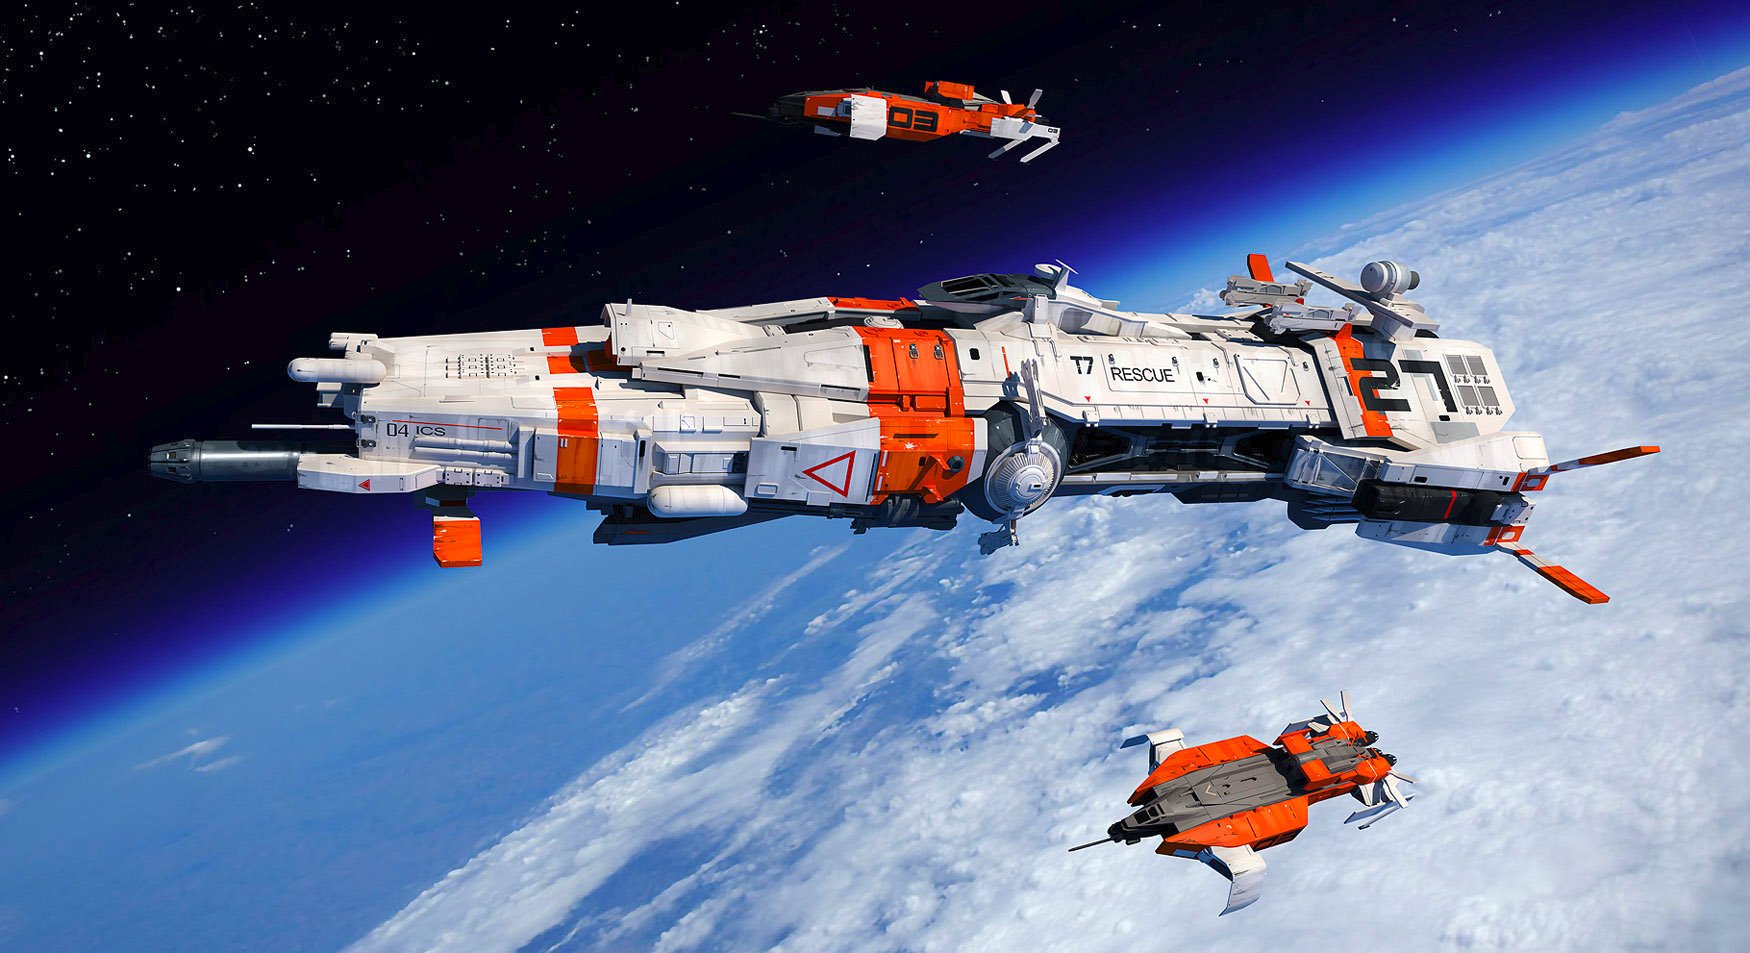 spaceships, Space, Aircrafts Wallpaper